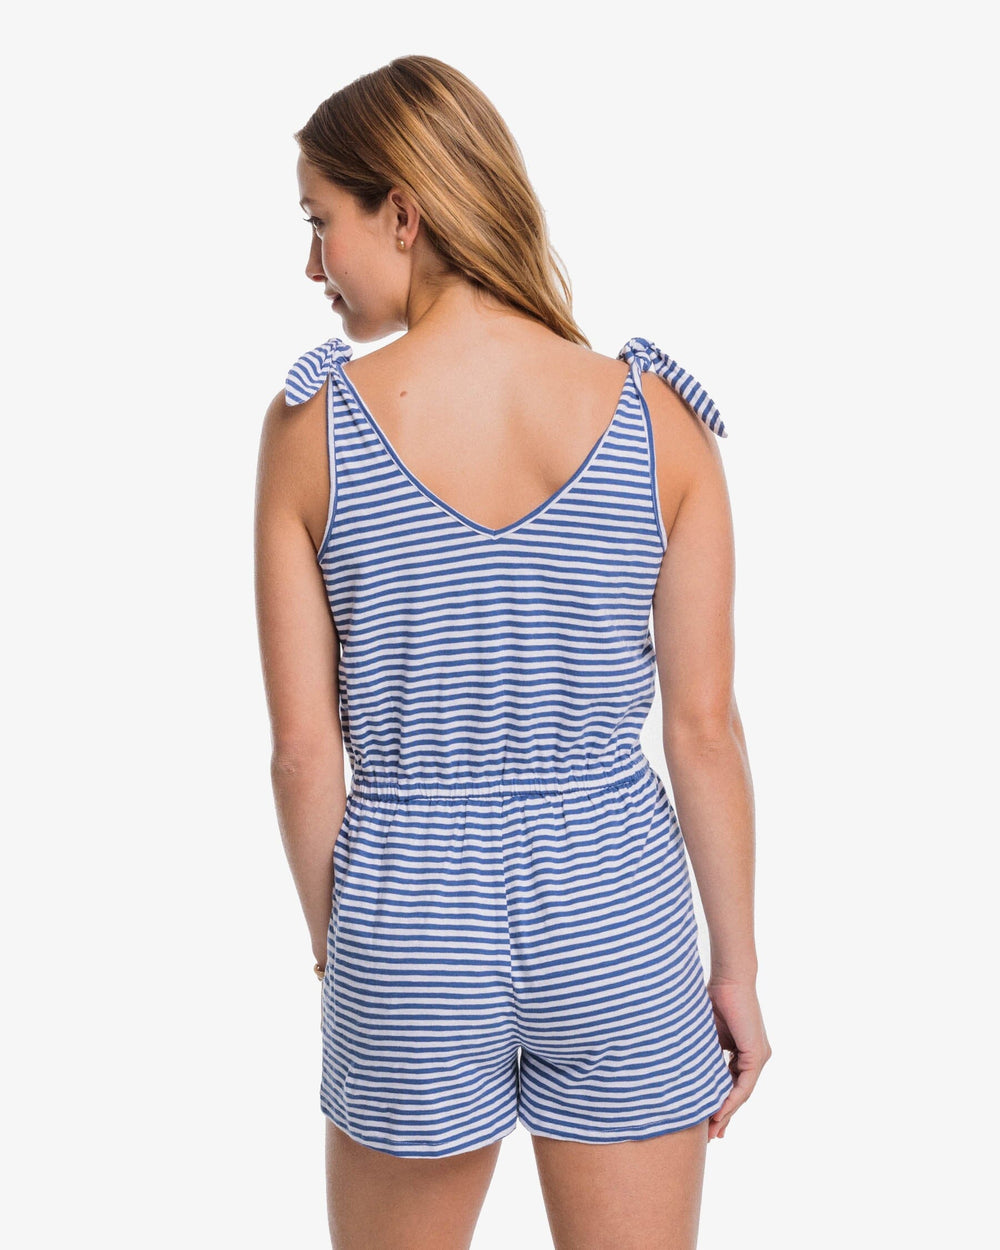 The back view of the Southern Tide Tillie Stripe Sun Farer Tie Shoulder Romper by Southern Tide - Nautical Navy